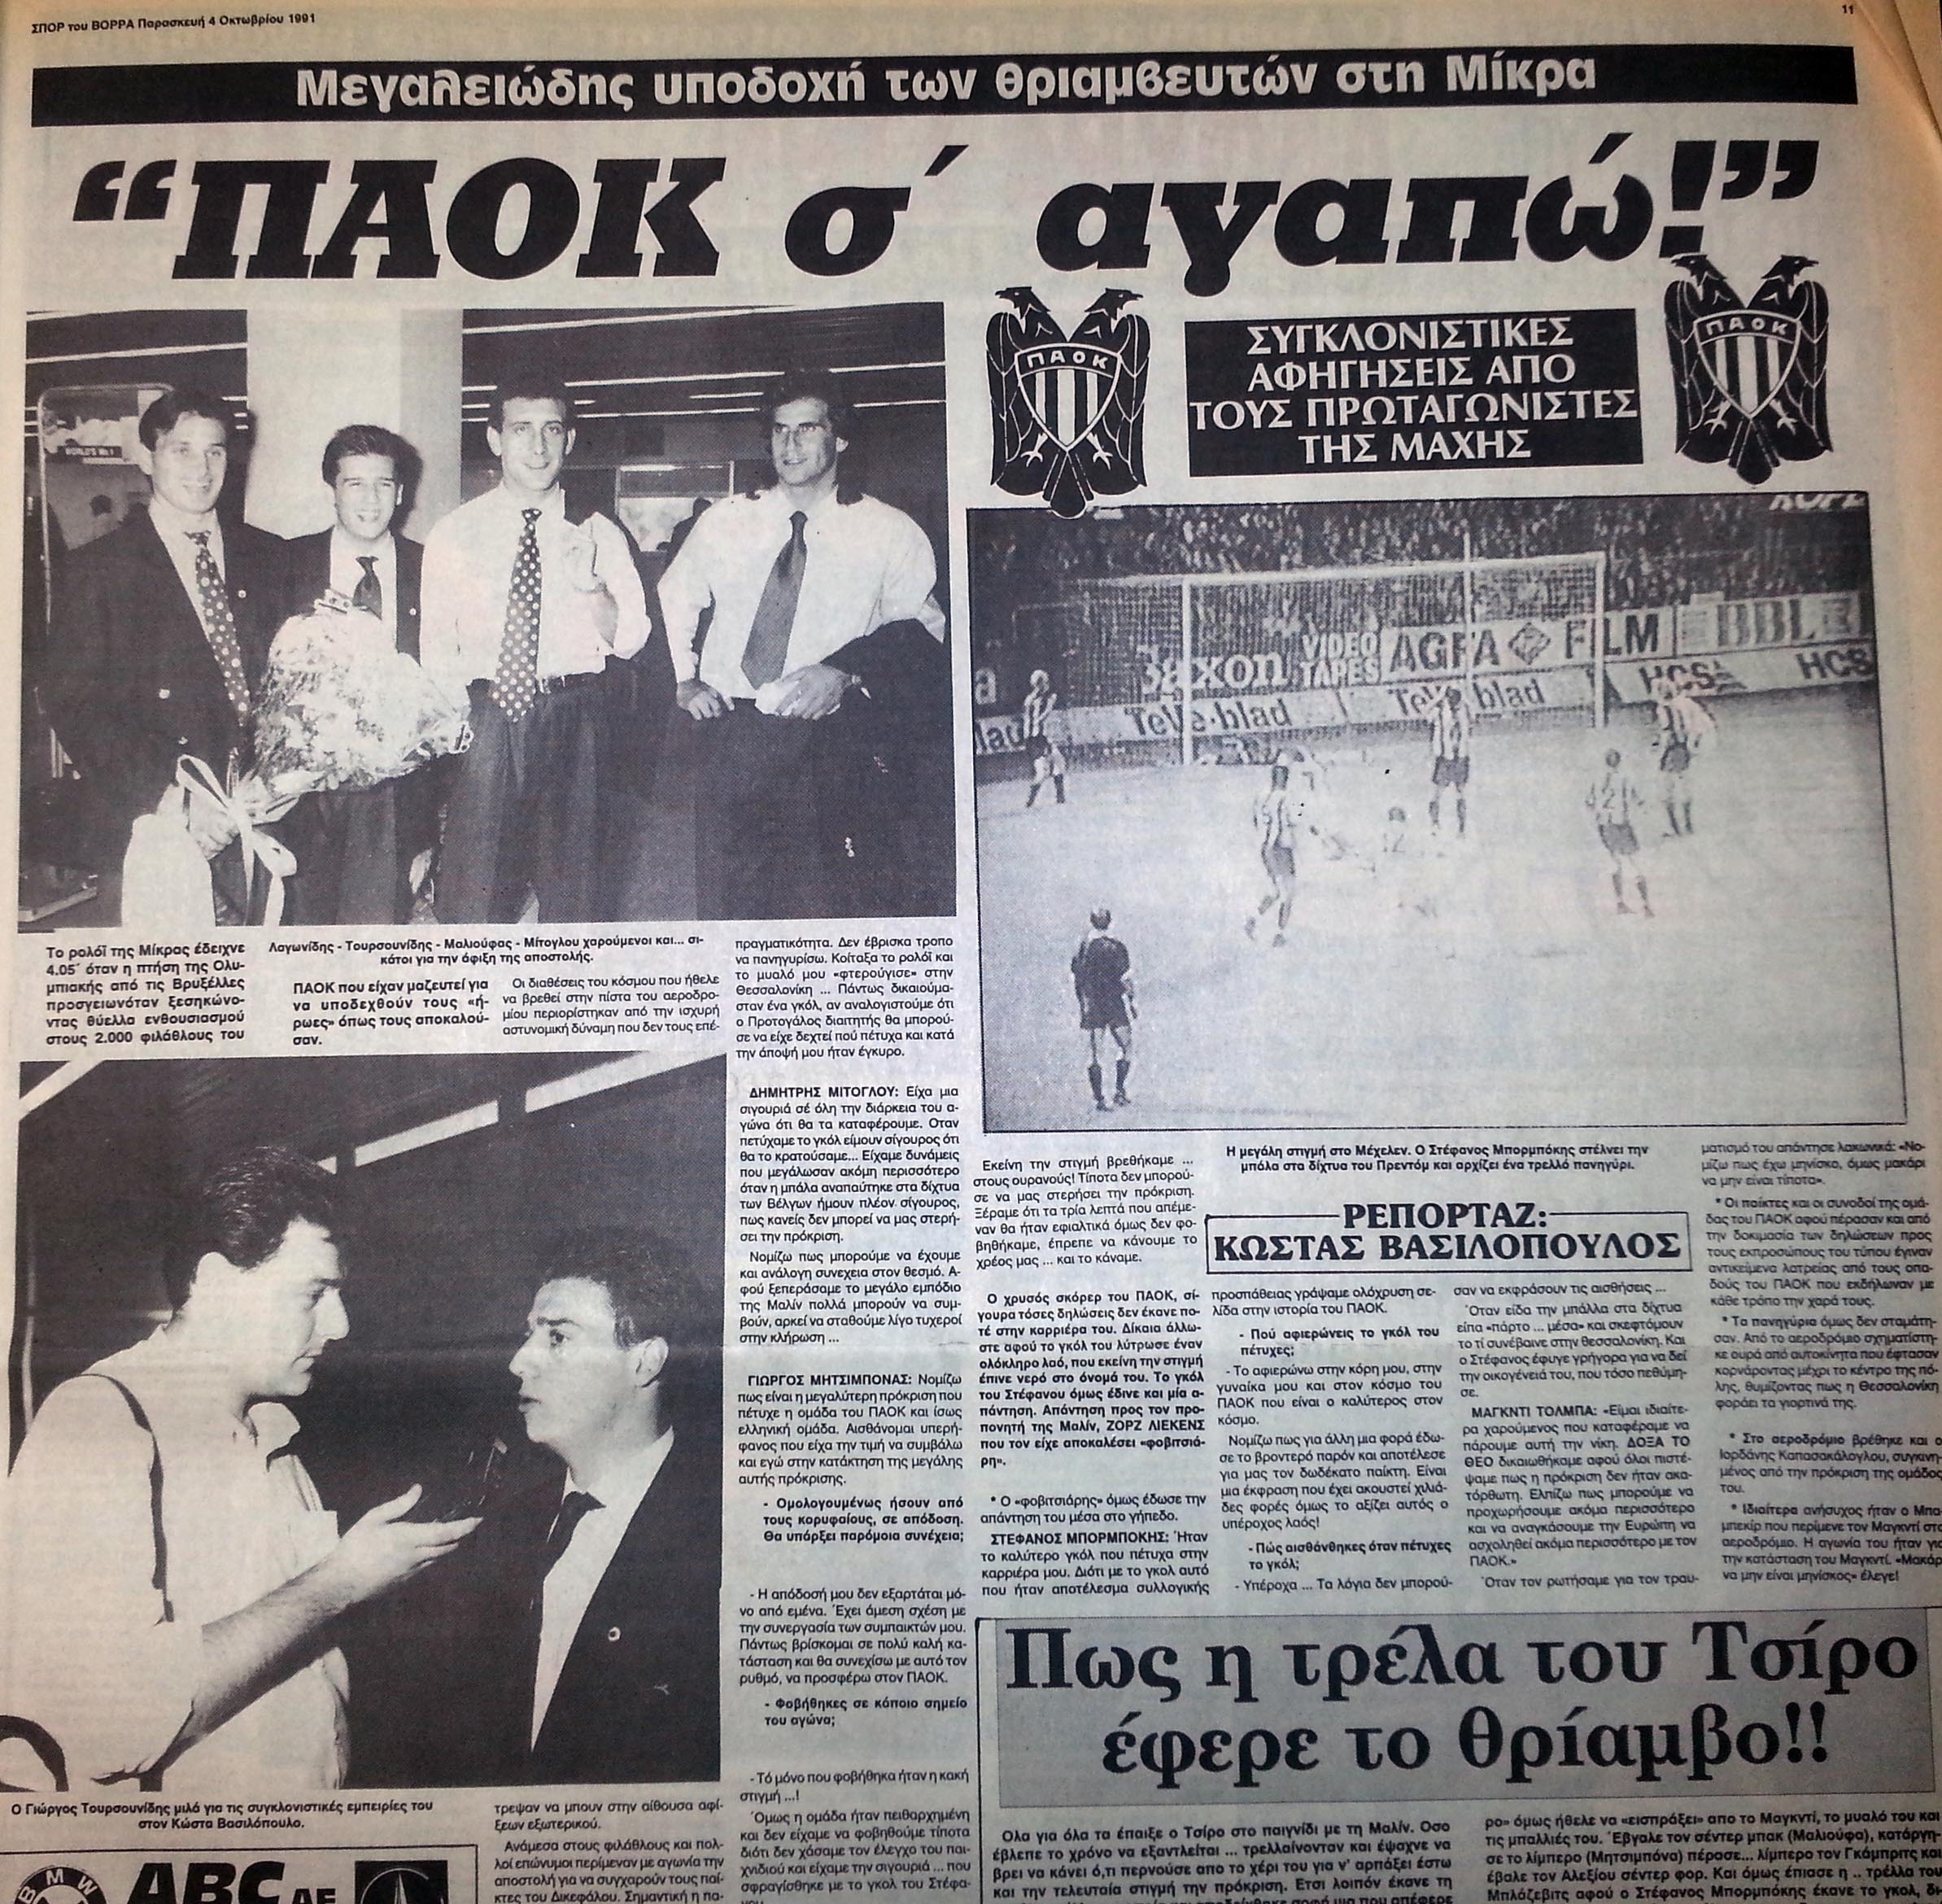 Publication of Nordens Idræt about Malin-PAOK